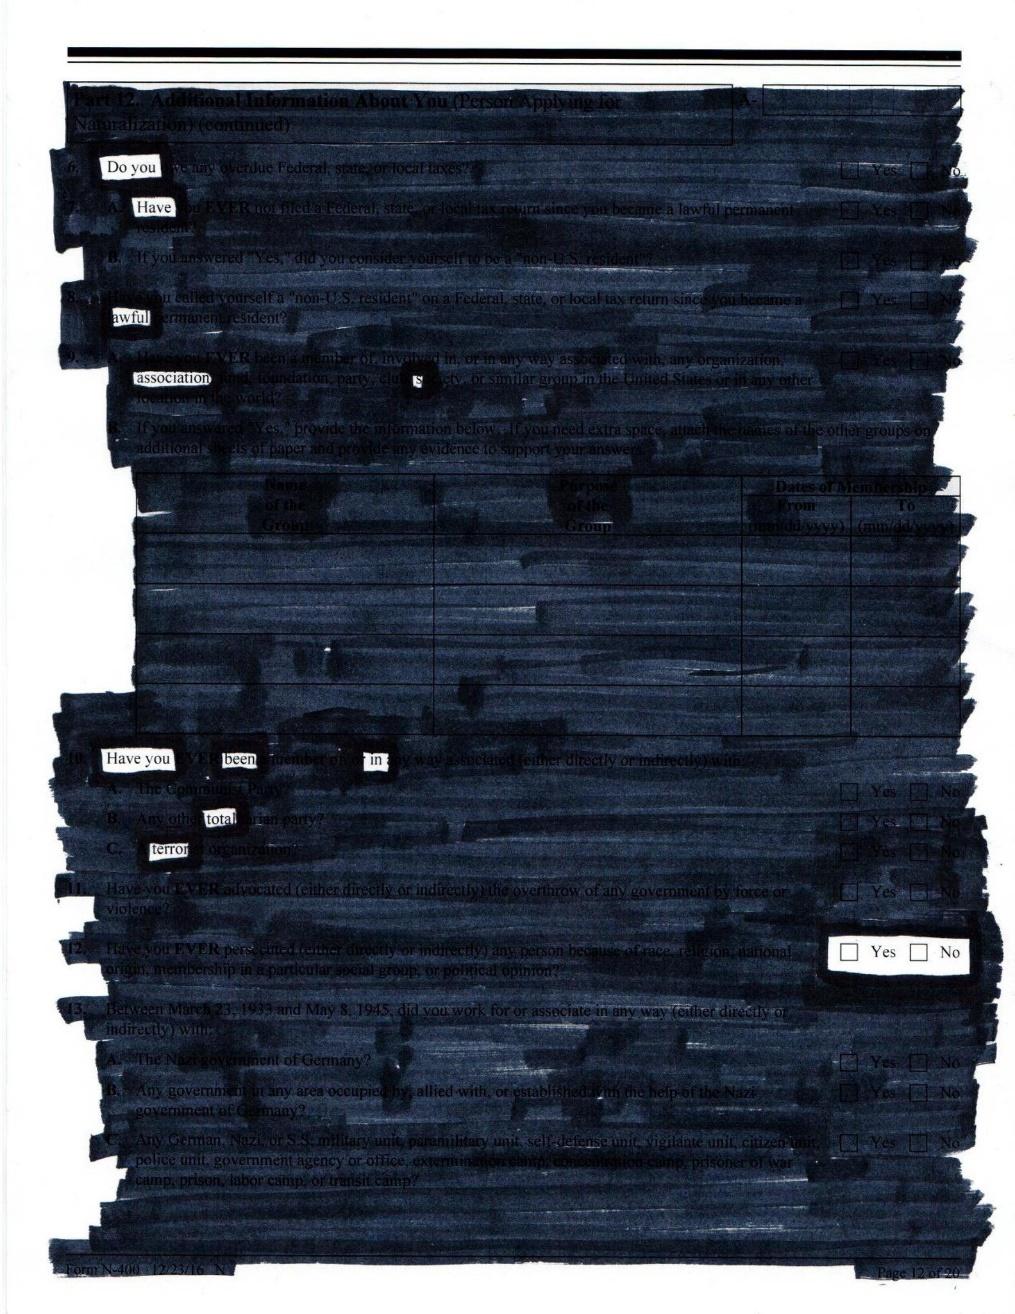 Blackout poem, with the words 'Do you have awful associations. Have you been in total terror. Yes No' surrounded by blacked out text.